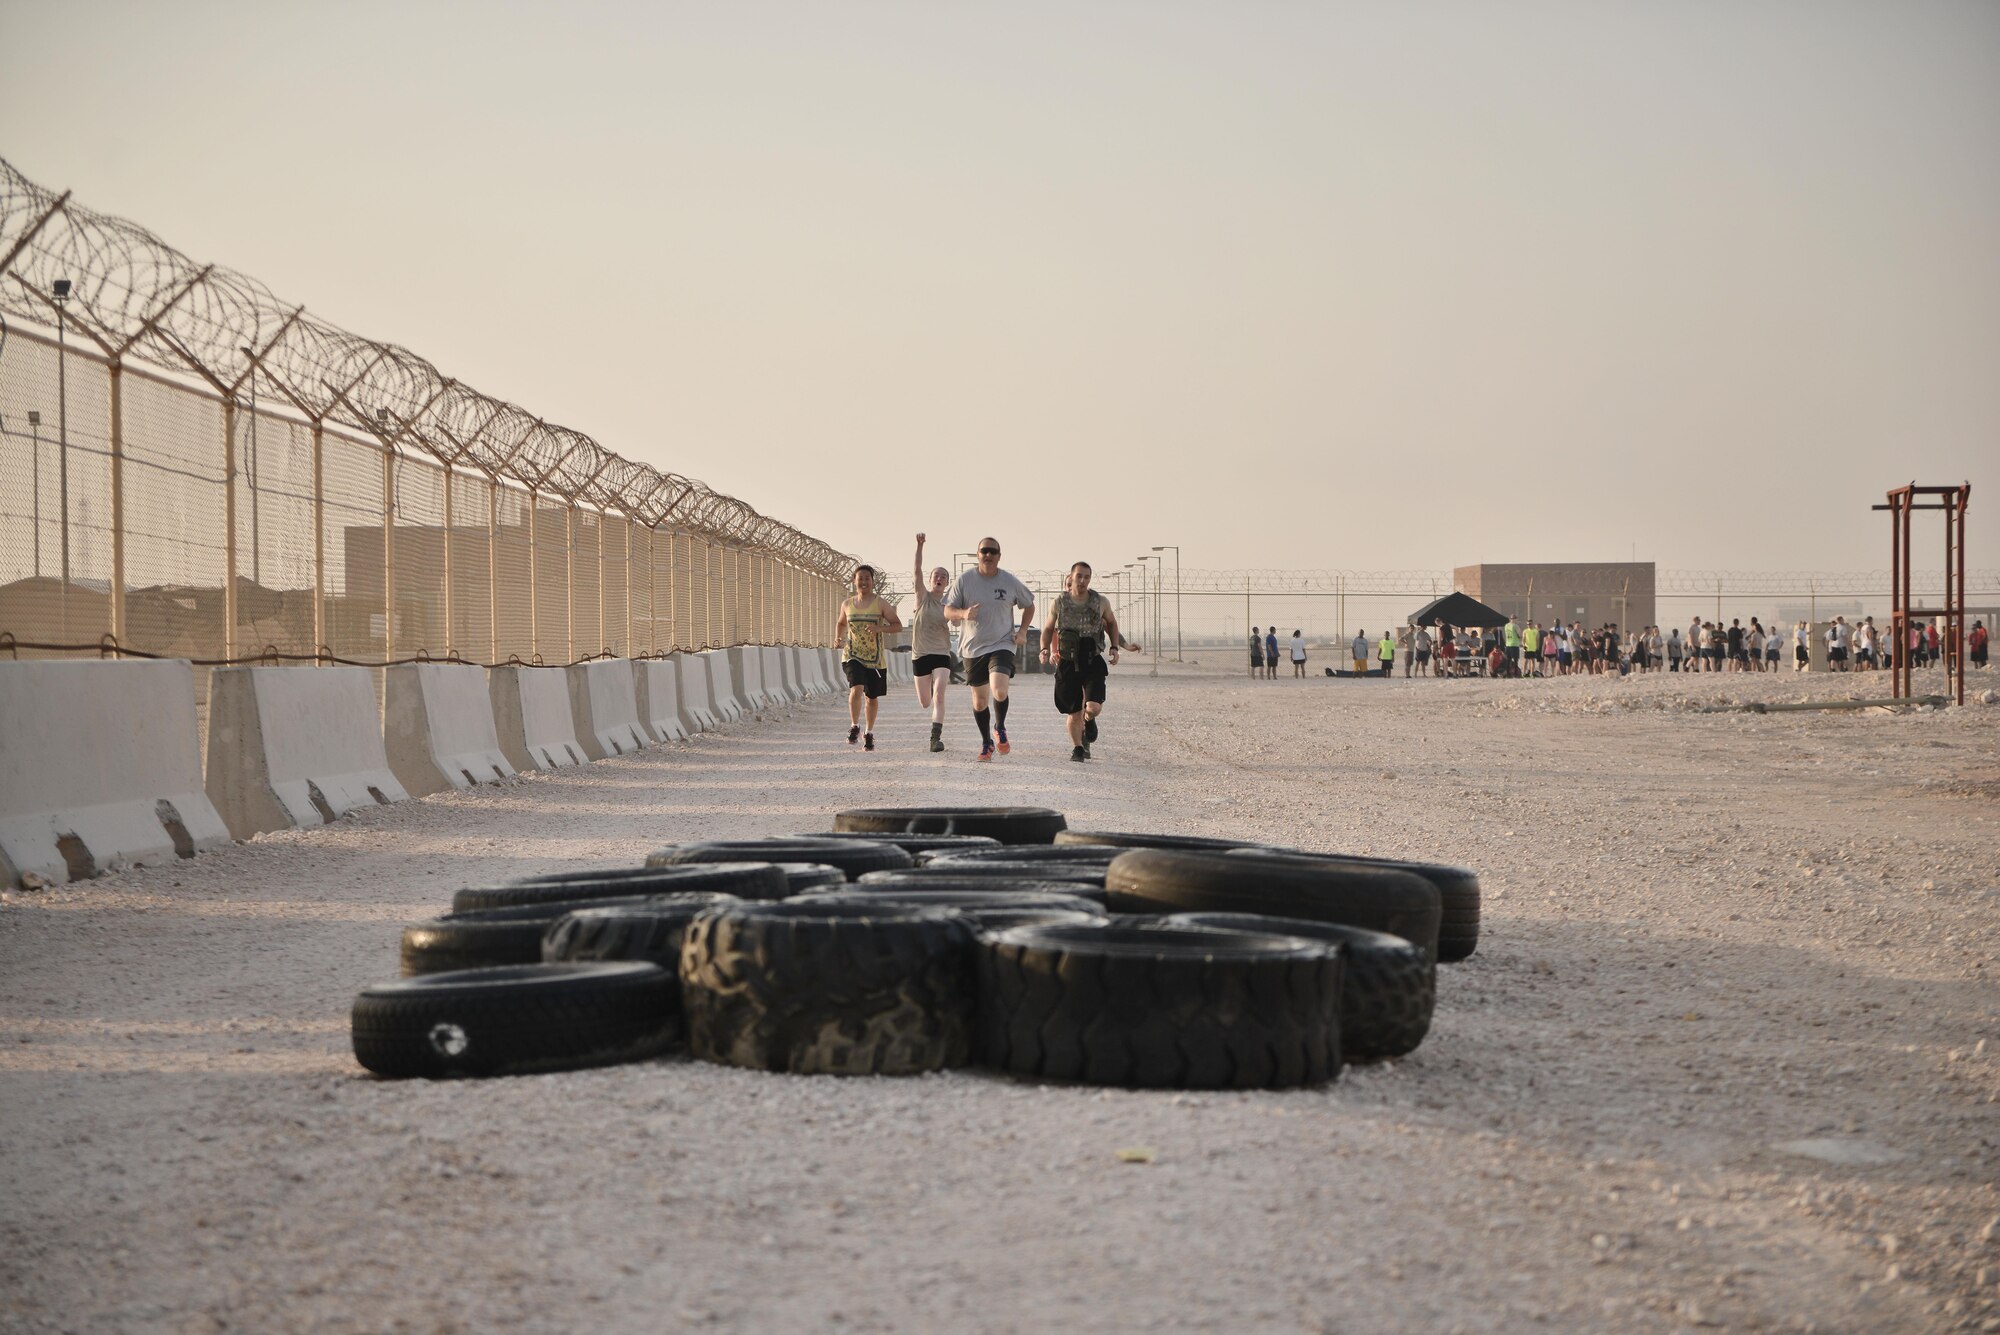 Participants approach a tire obstacle during a Diversity Day Mud Run September 20, 2015 at Al Udeid Air Base, Qatar. The mud run challenged 106 runners with a two mile course that contained several challenges from low crawling, a T-wall climb, barrier hurdles, and a Ôdeep freezeÕ cold mud pool. The event was held to help spread the word of Diversity Day, an initiative started by the Department of Defense for diversity events held throughout the year. (U.S. Air Force photo/ Staff Sgt. Alexandre Montes)